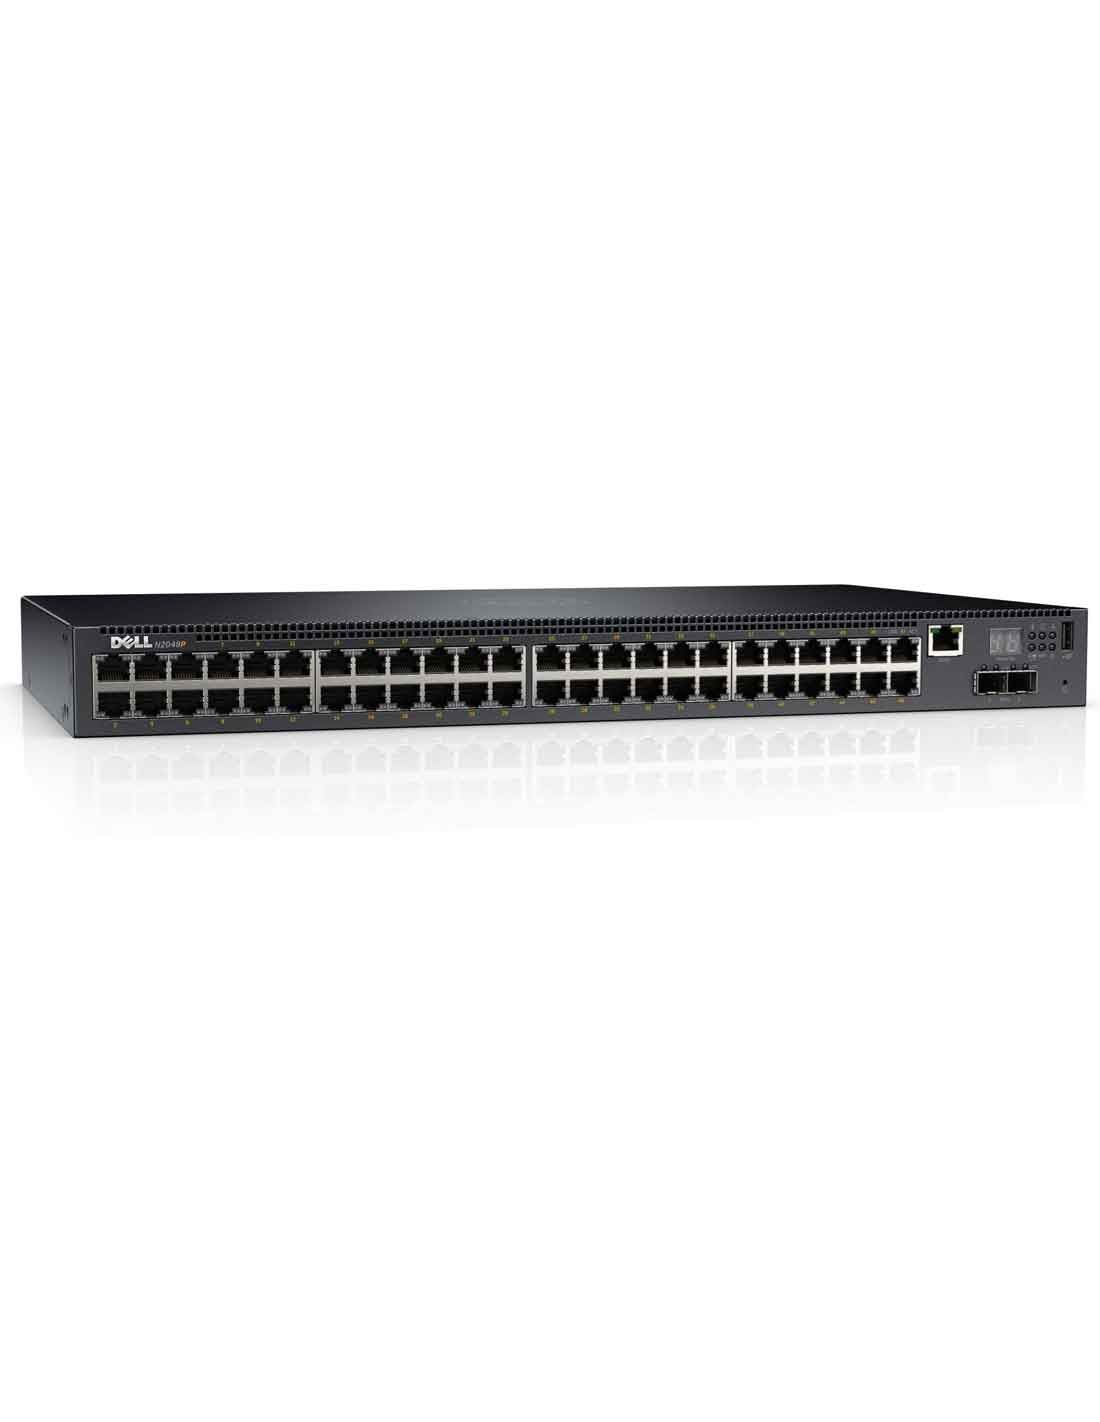 Dell Networking N2048 Switch 48 port at the cheapest price in Dubai UAE